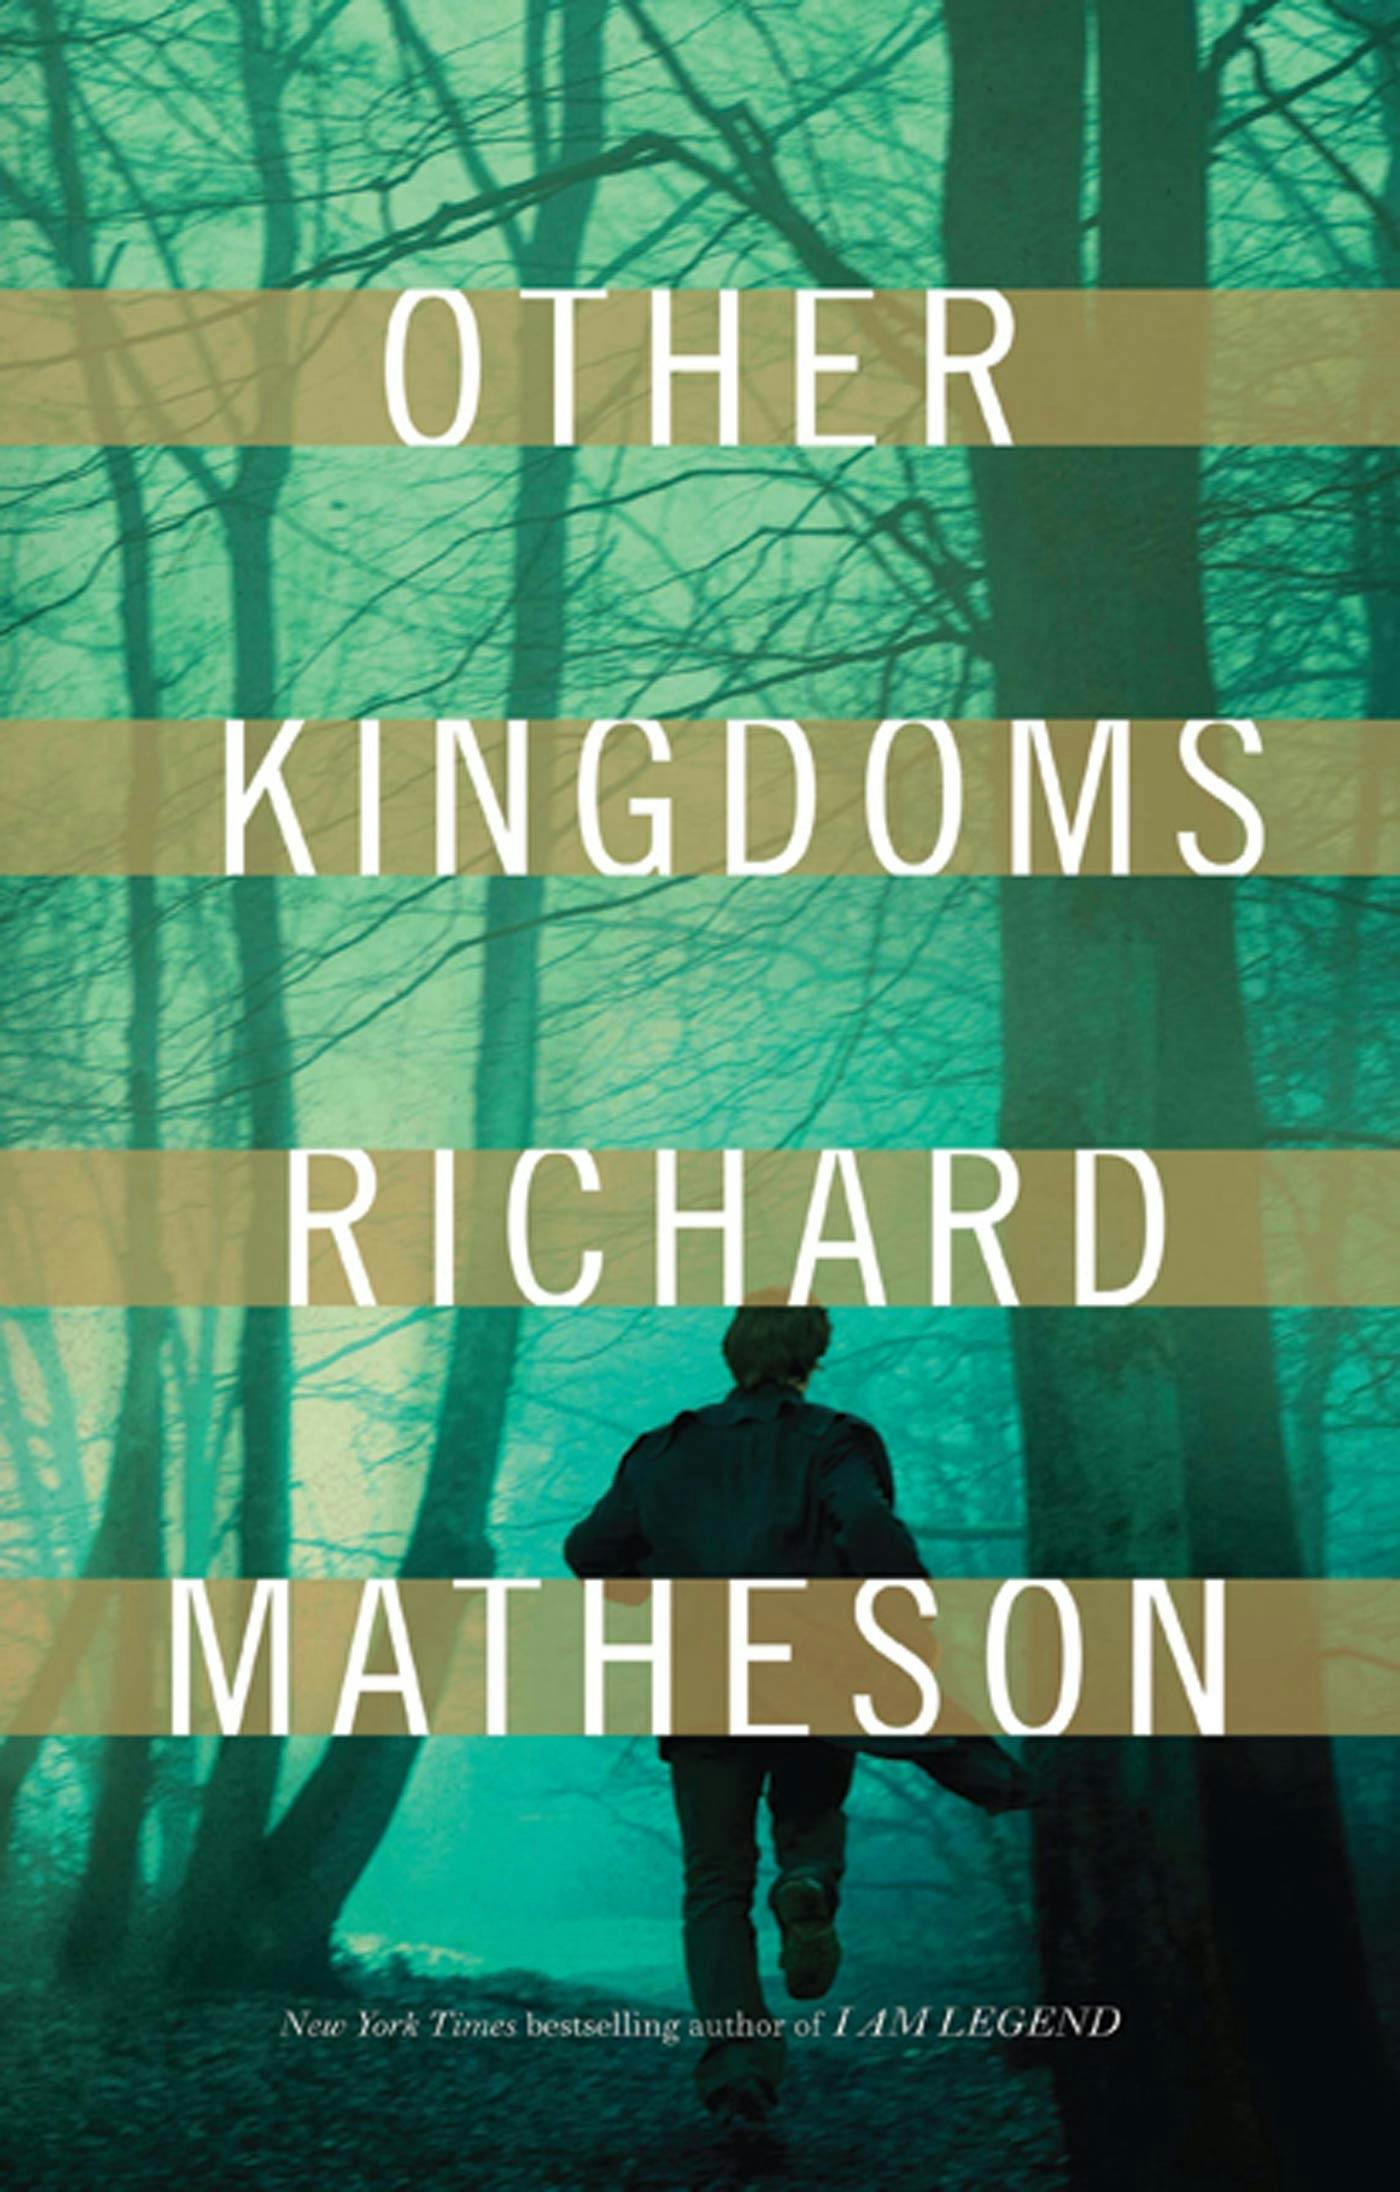 Cover for the book titled as: Other Kingdoms